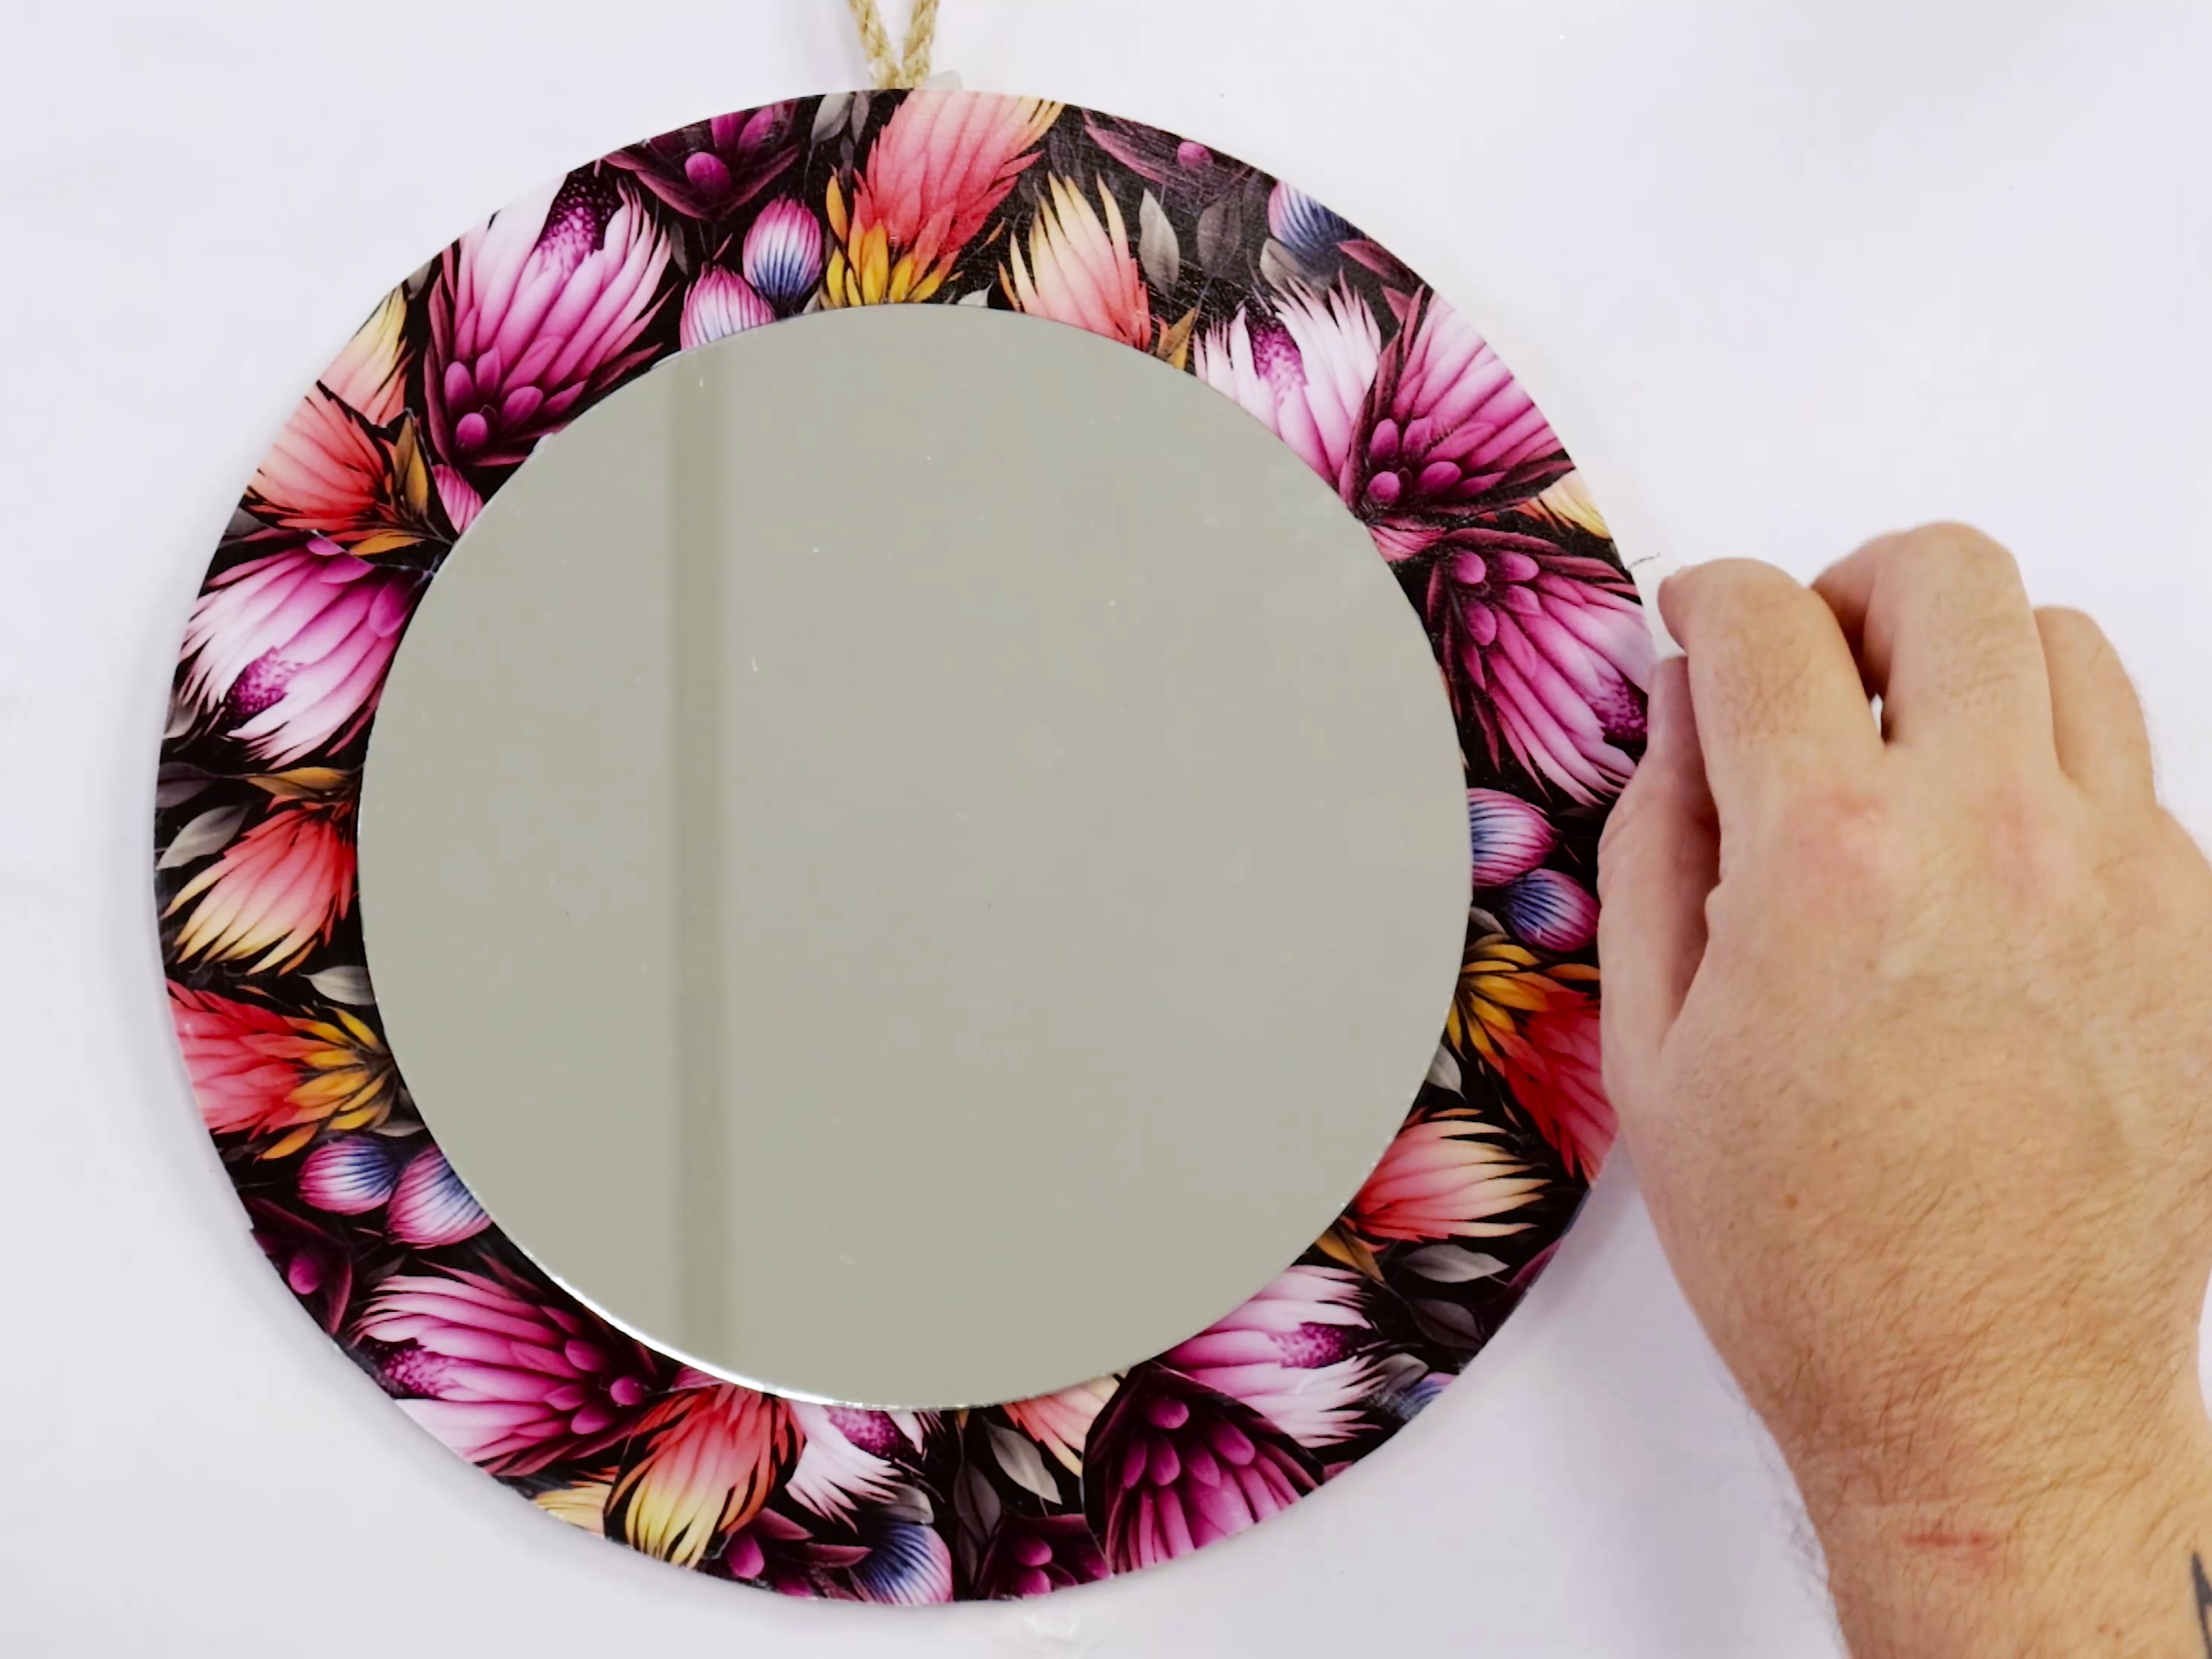 10. Decoupaged dark floral mirror with string for hanging